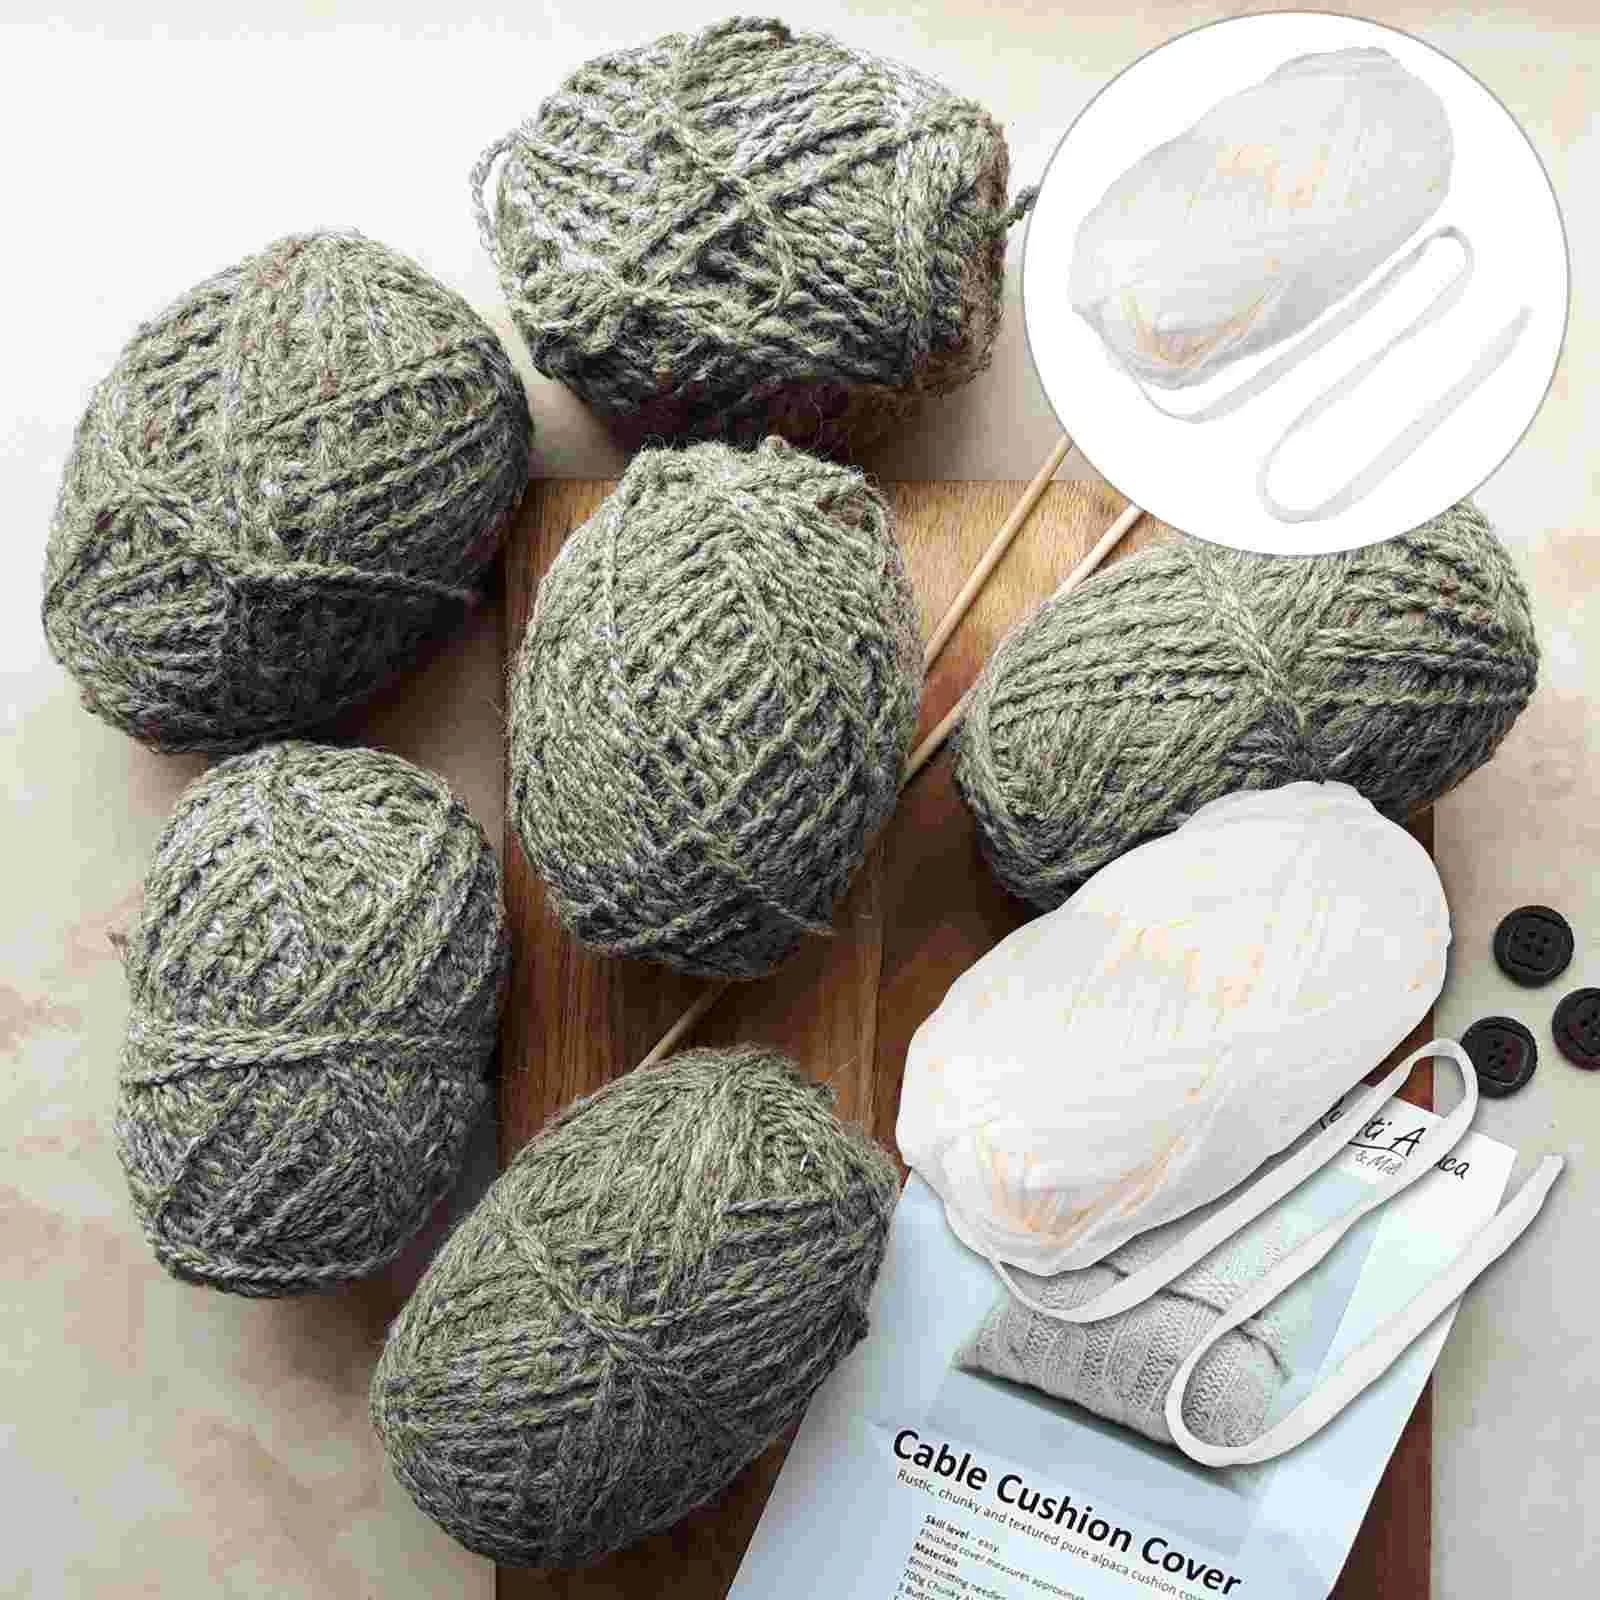 

Cord Flat Braided Rope Knitting Macrame Chinese Diy Knotting String Roll Strapping Woven Natural Yarn Band Twine Stretch Craft